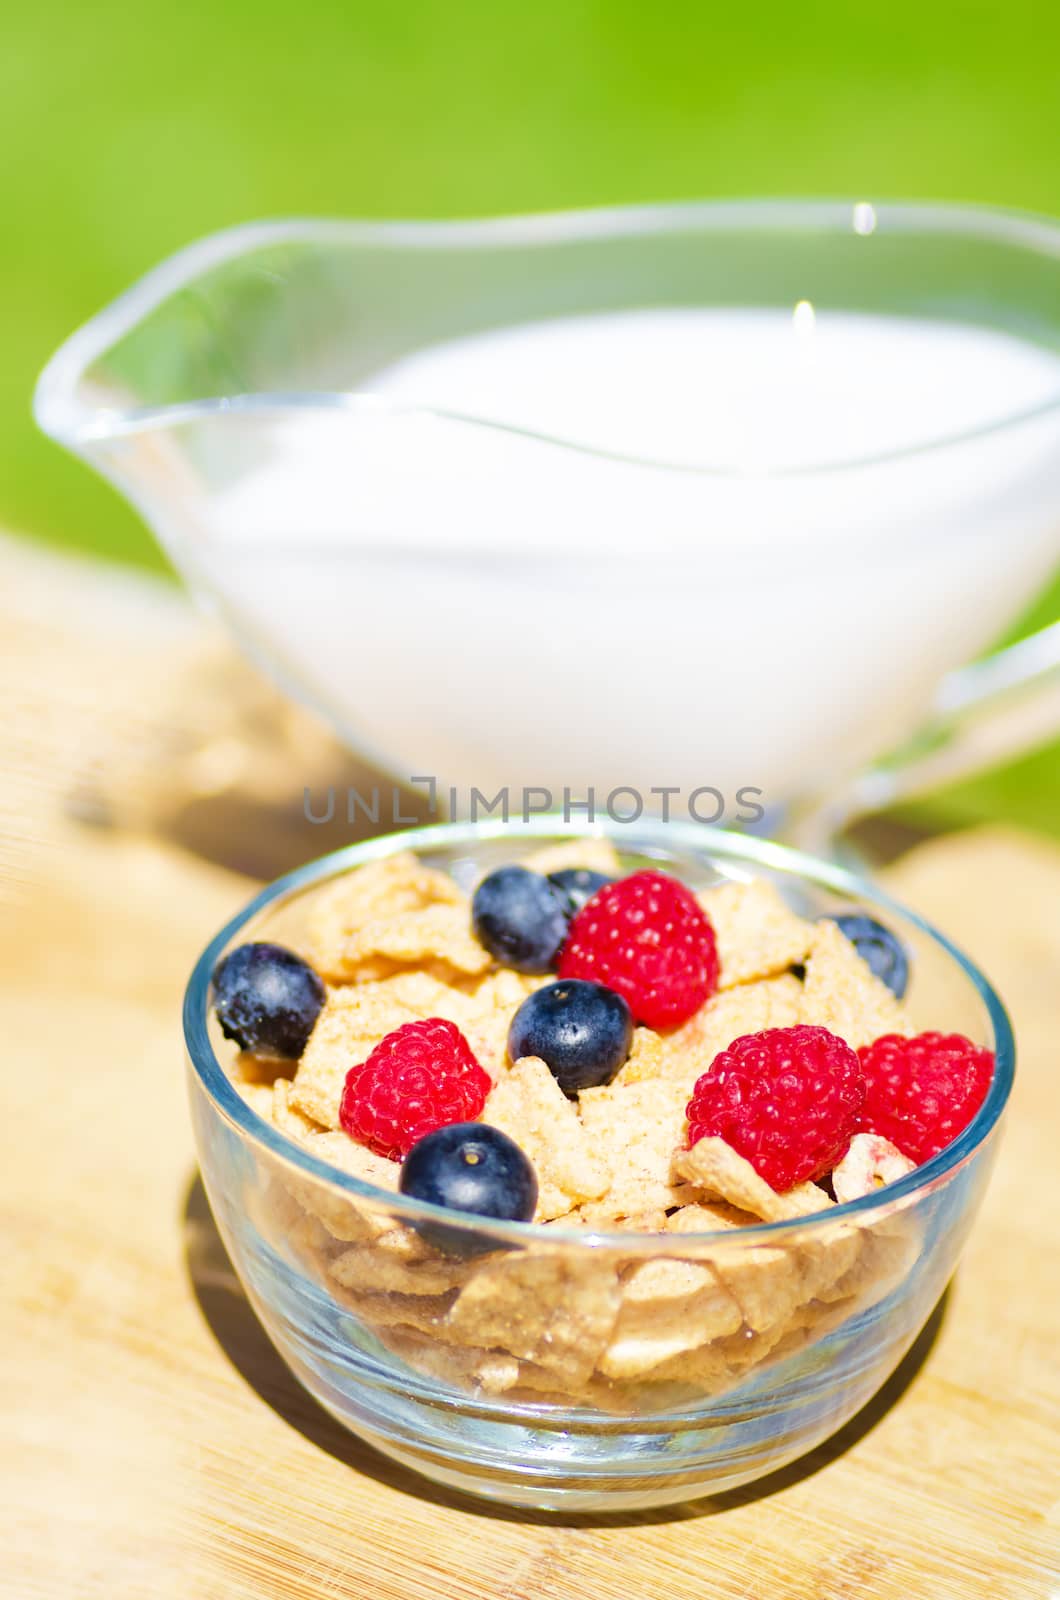 Healthy breakfast with cereals and berries by EllenSmile